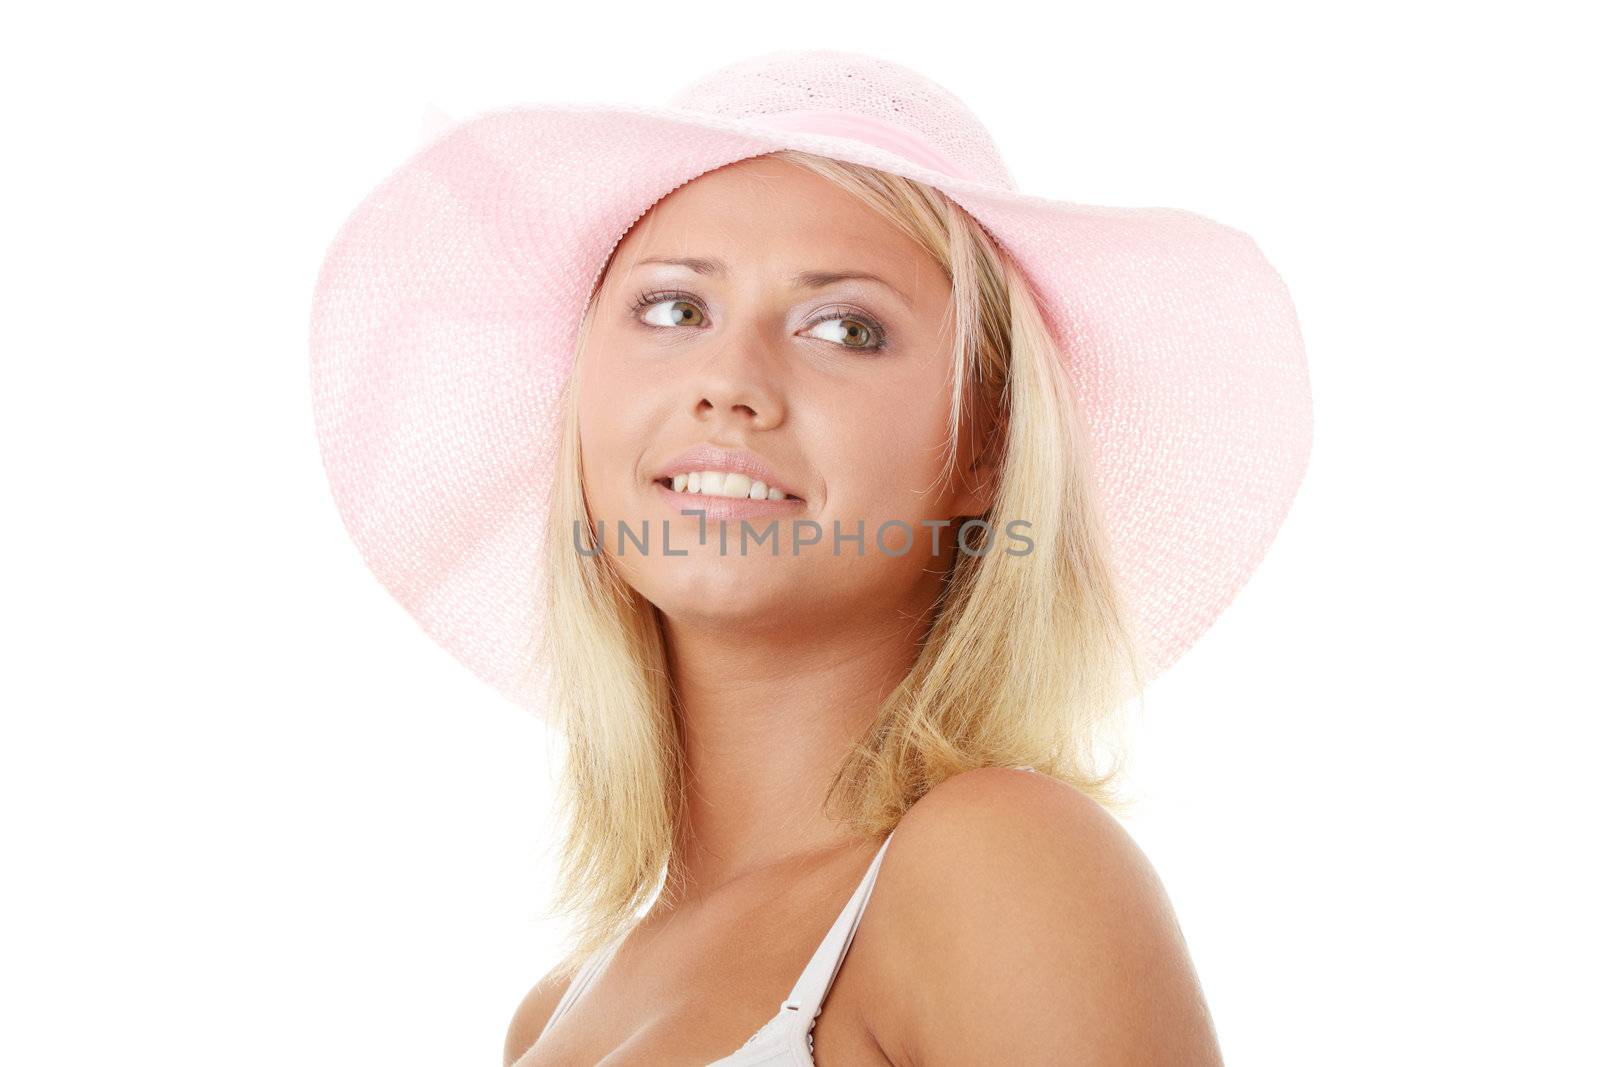 Portrait of an attractive young woman wearing a pink straw hat